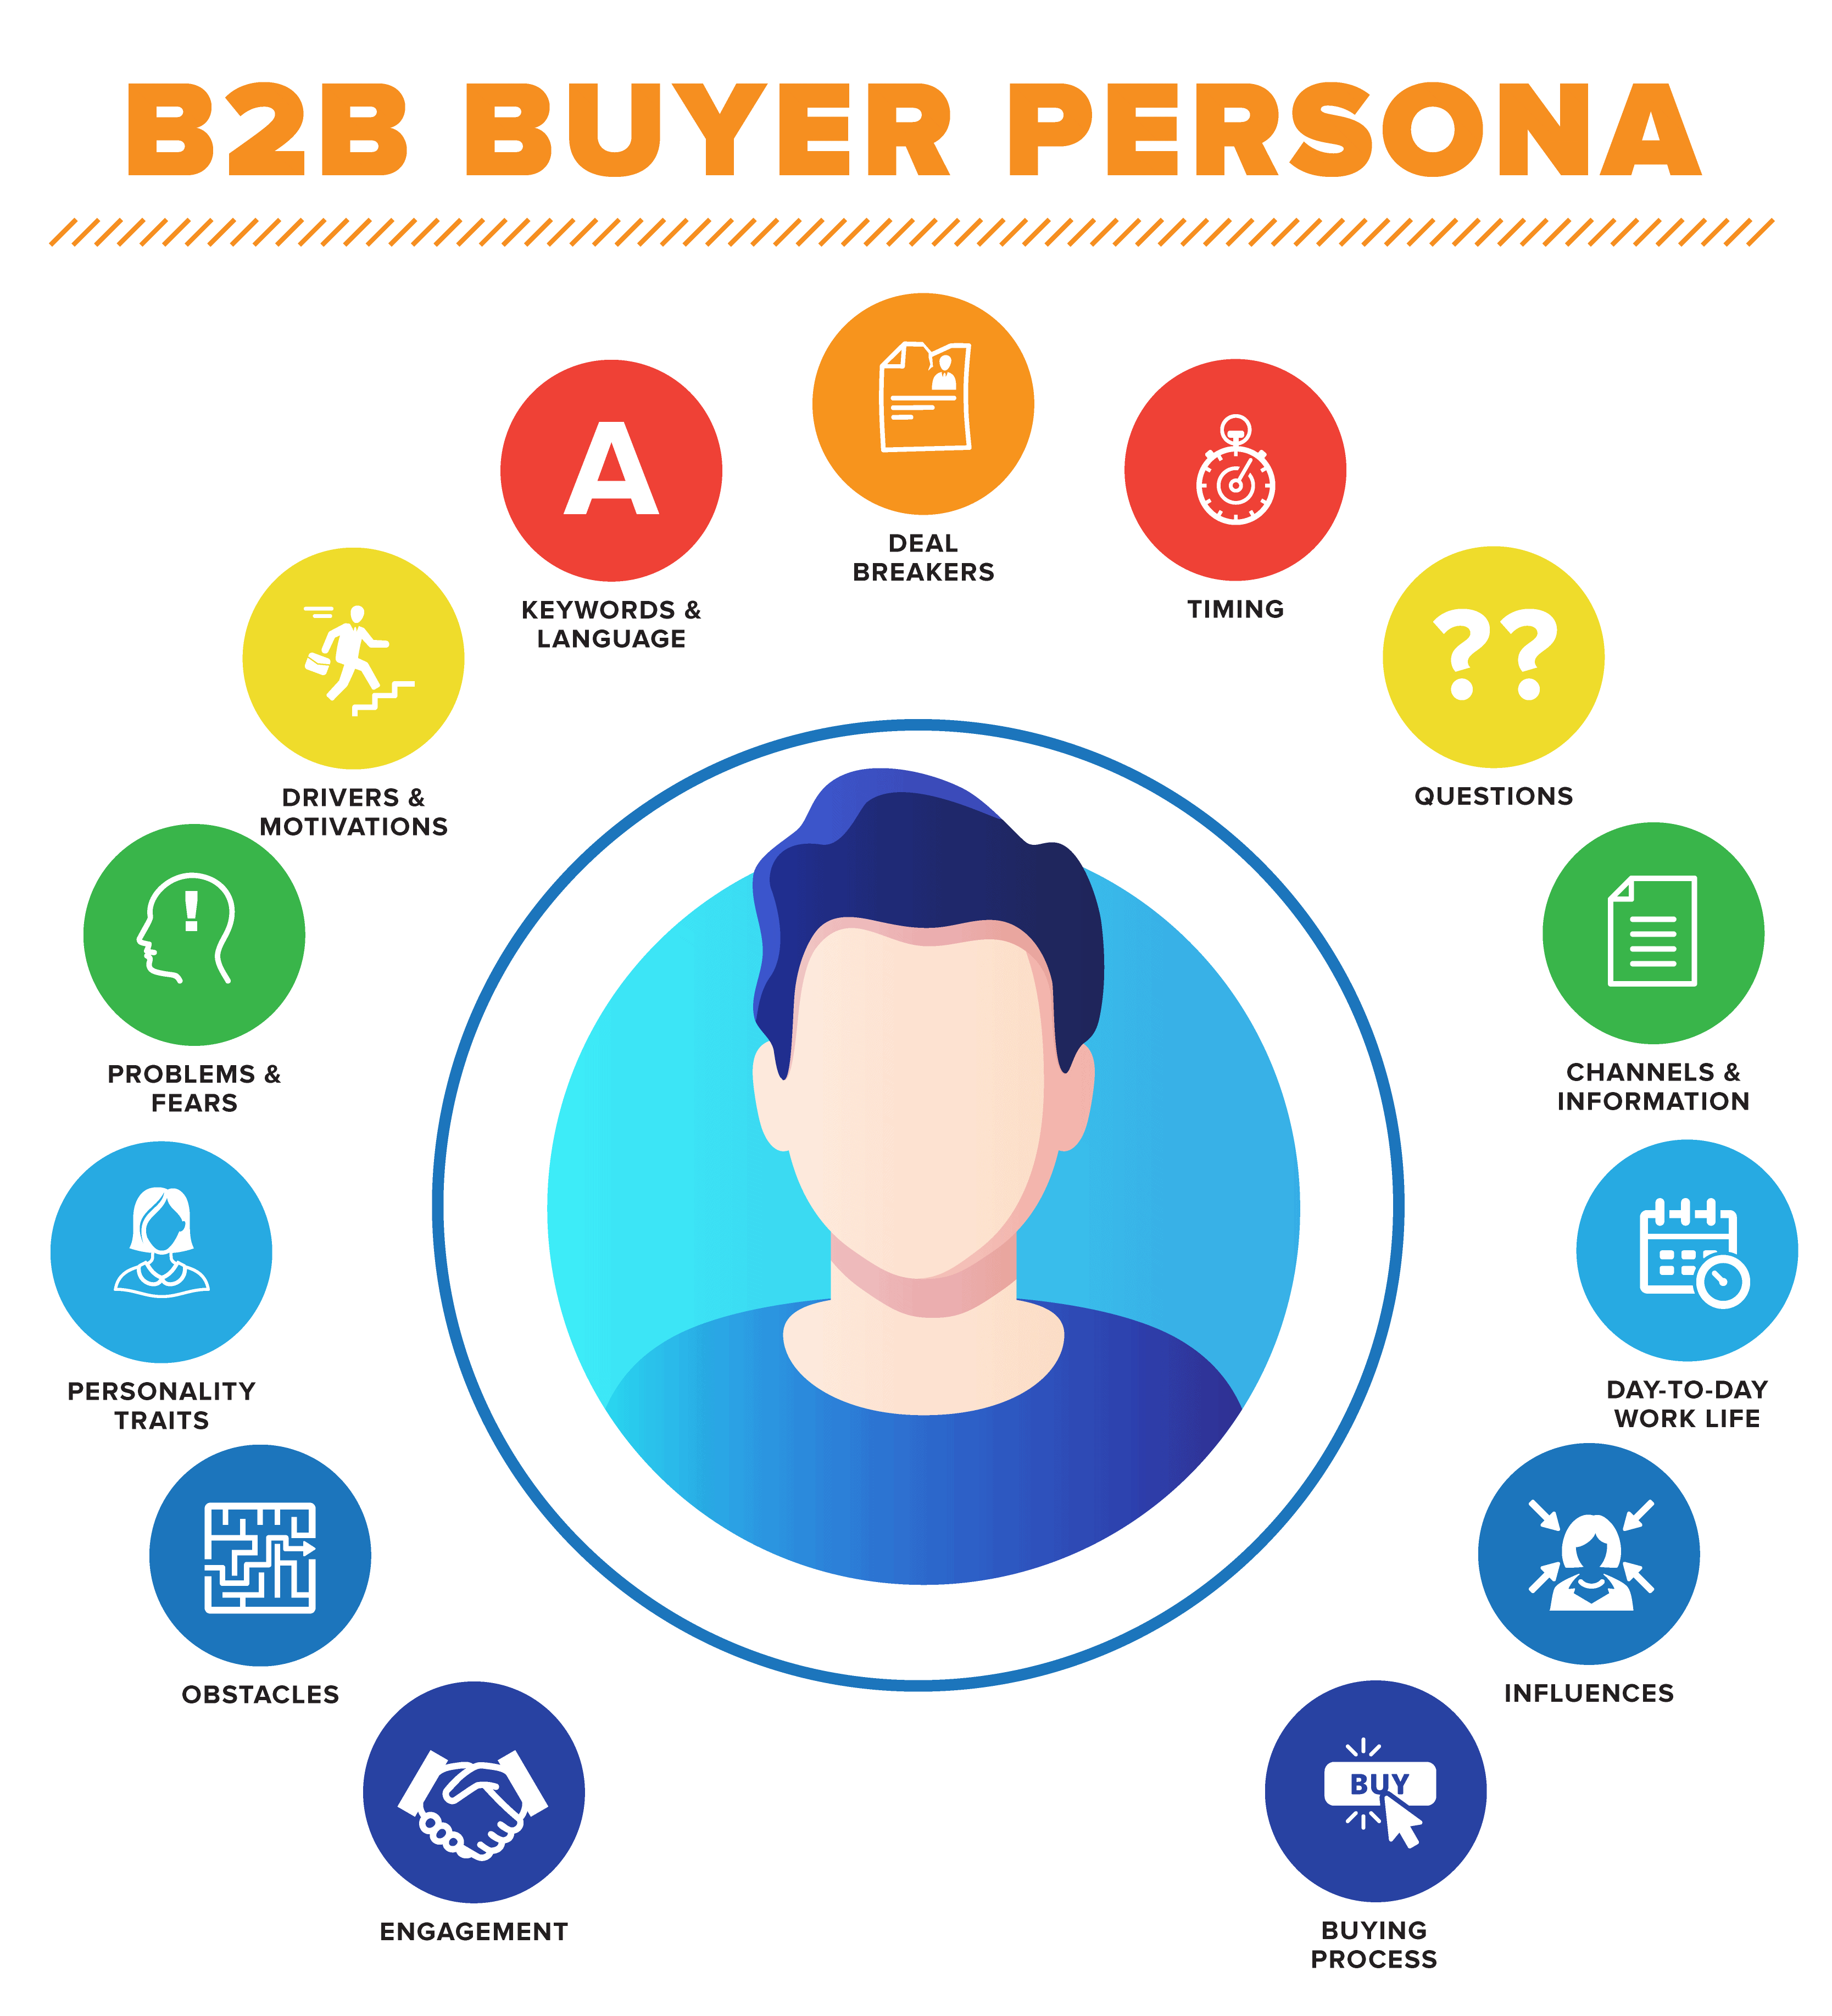 post-pandemic marketing trends - using buyer personas - Infographic